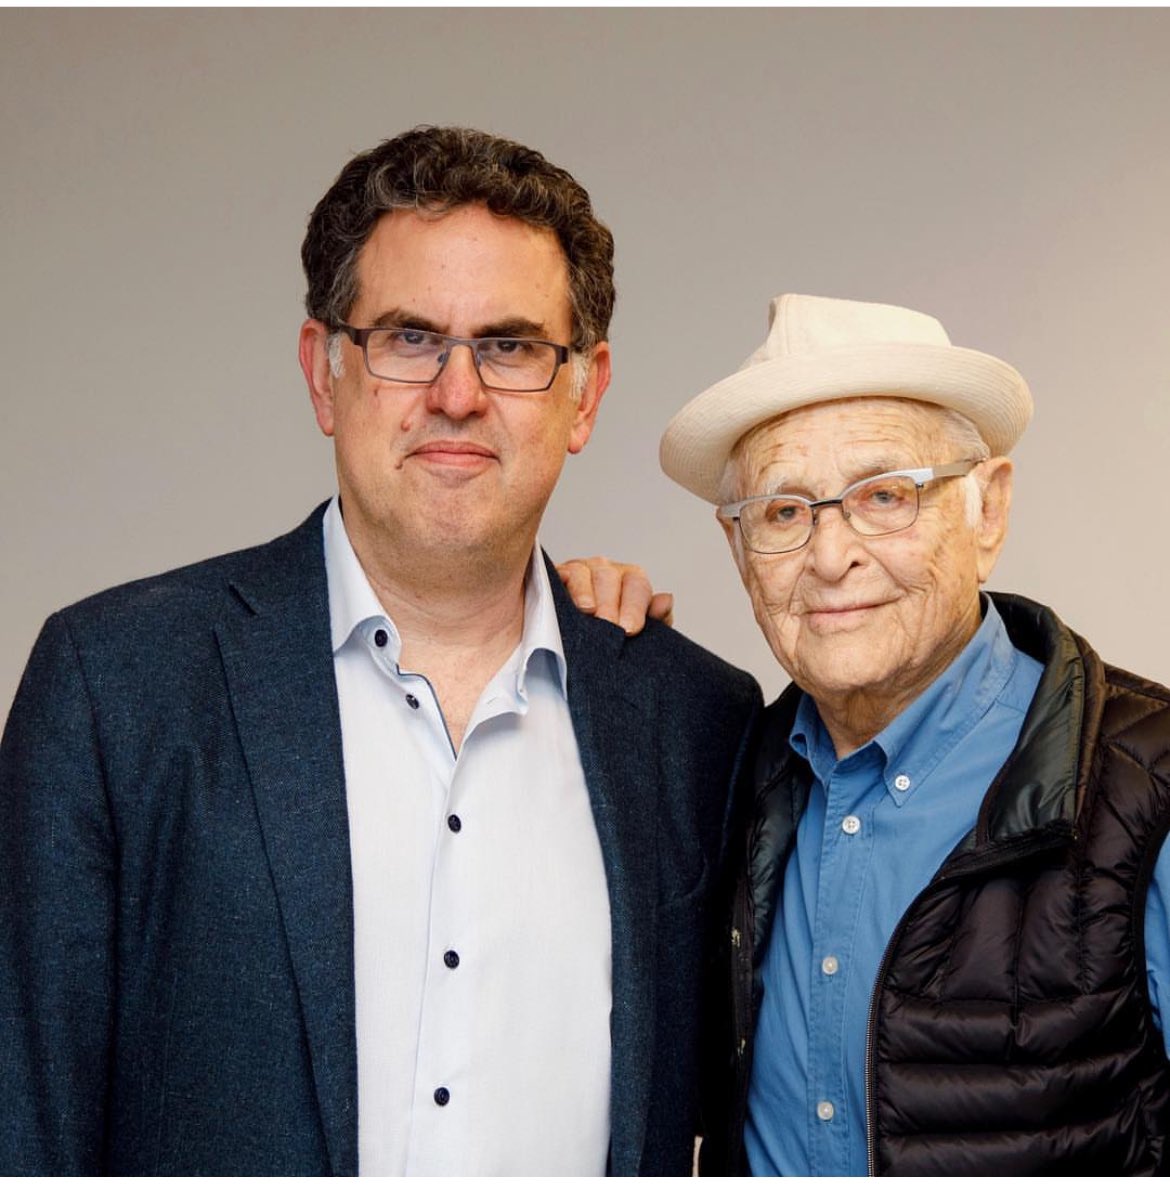 When I was President of the WGAW, I met Norman Lear once, just long enough to get this picture with him. Like many writers his work was an inspiration. And he was a great Guild member.  RIP